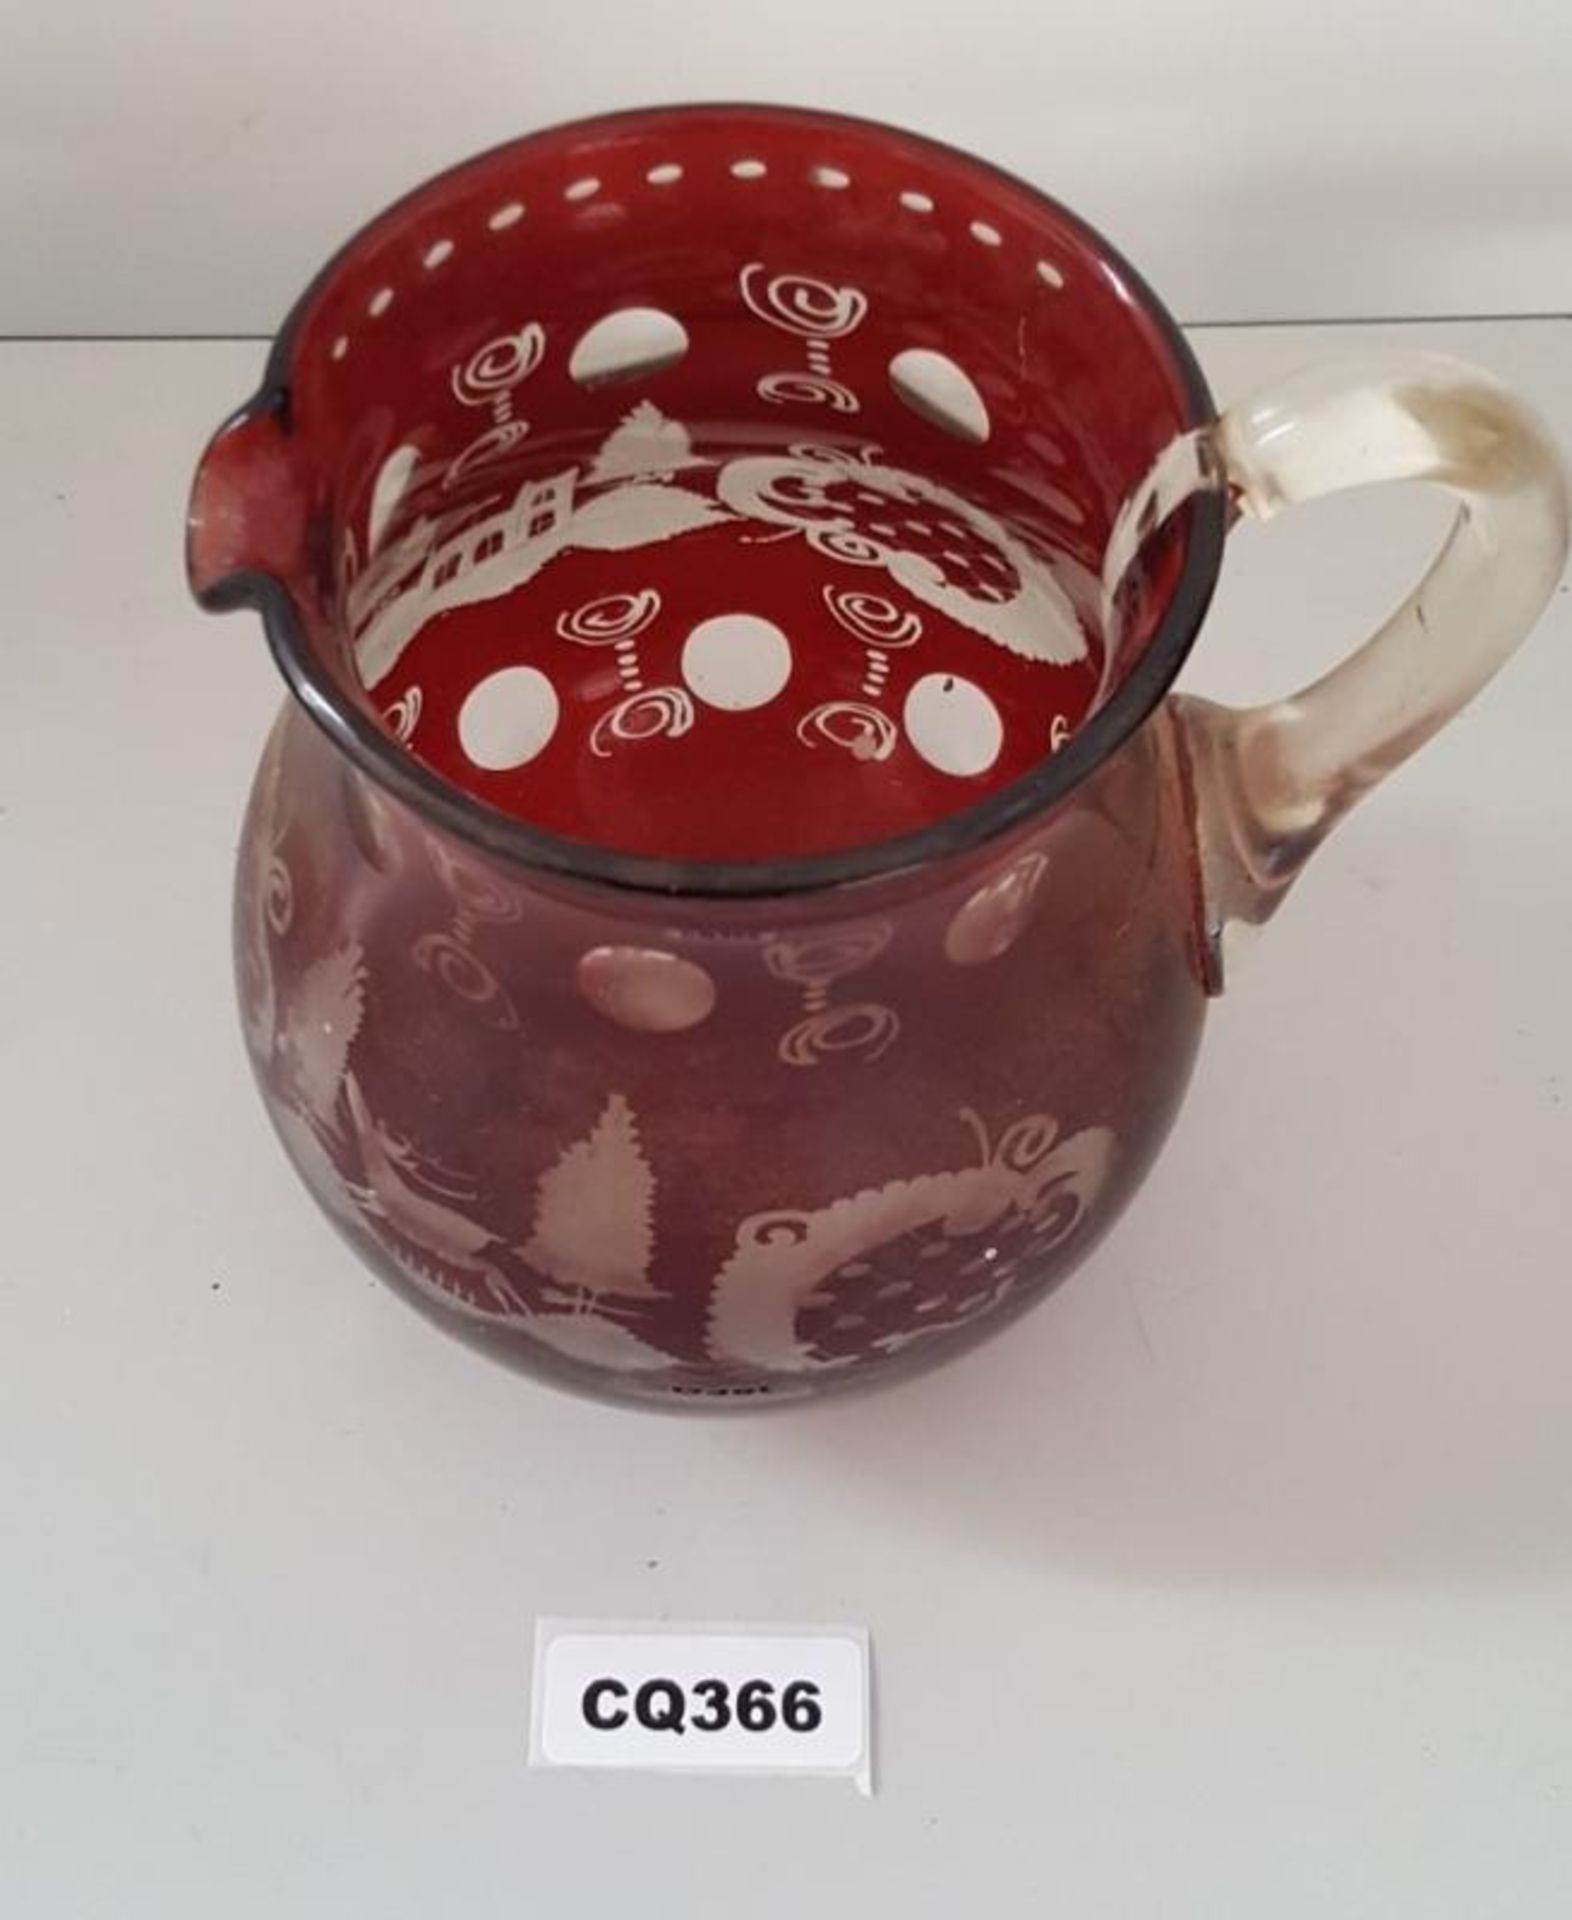 1 x Egermann Antique Glass Pitcher In Ruby Red With Clear Handle - Ref CQ366 E - Dimensions: H19/L17 - Image 2 of 4